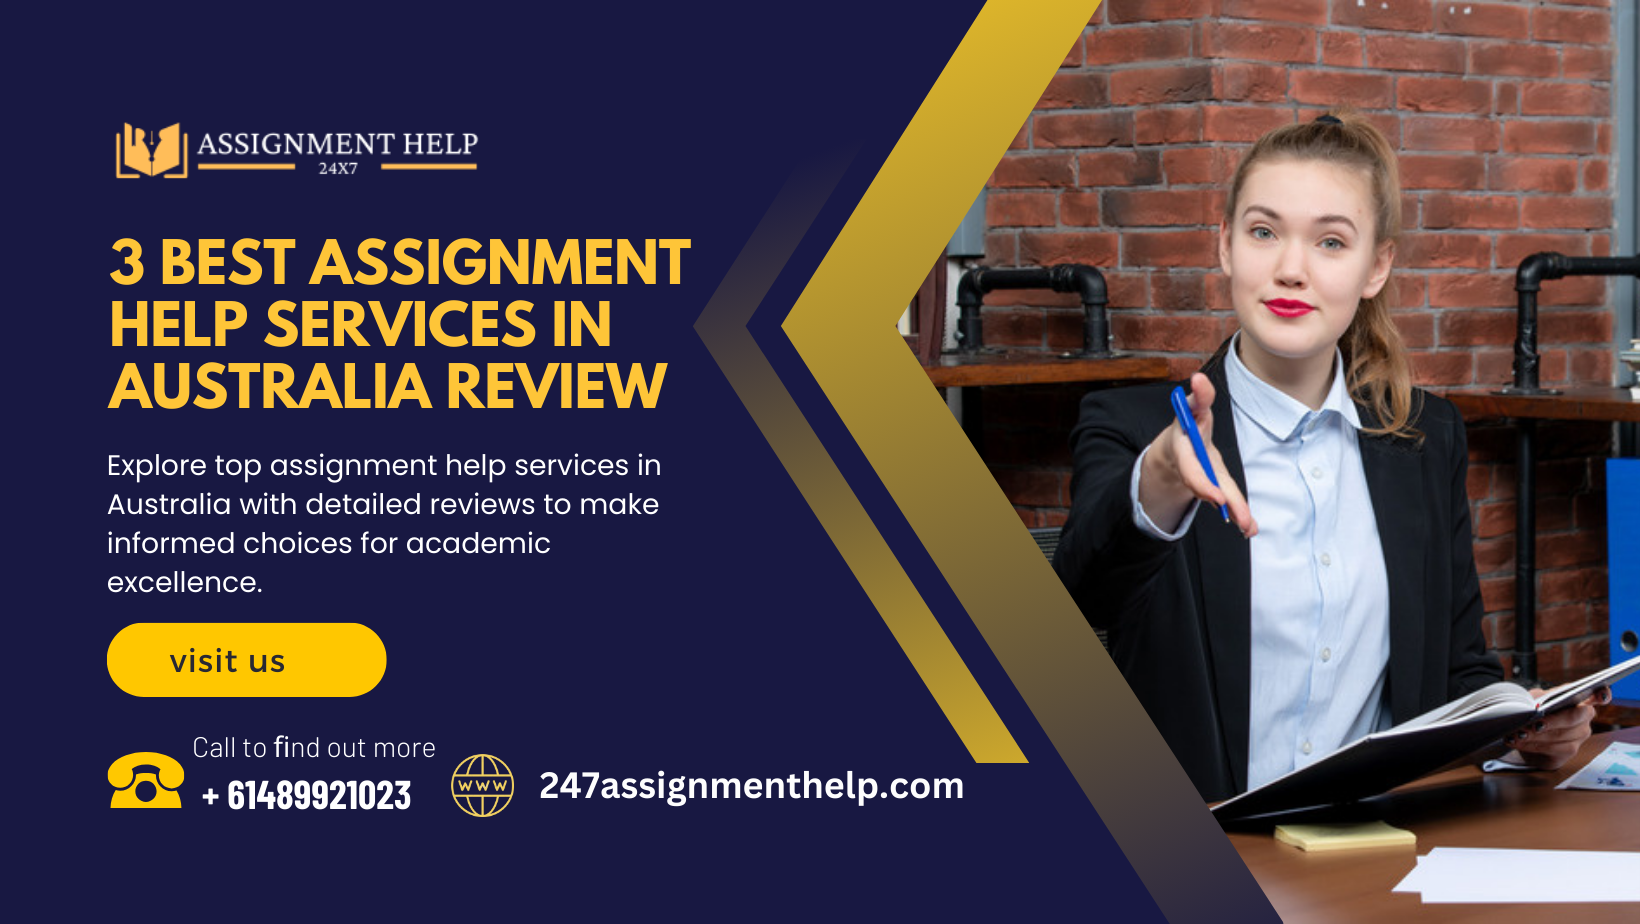 3 Best Assignment Help Services in Australia Review